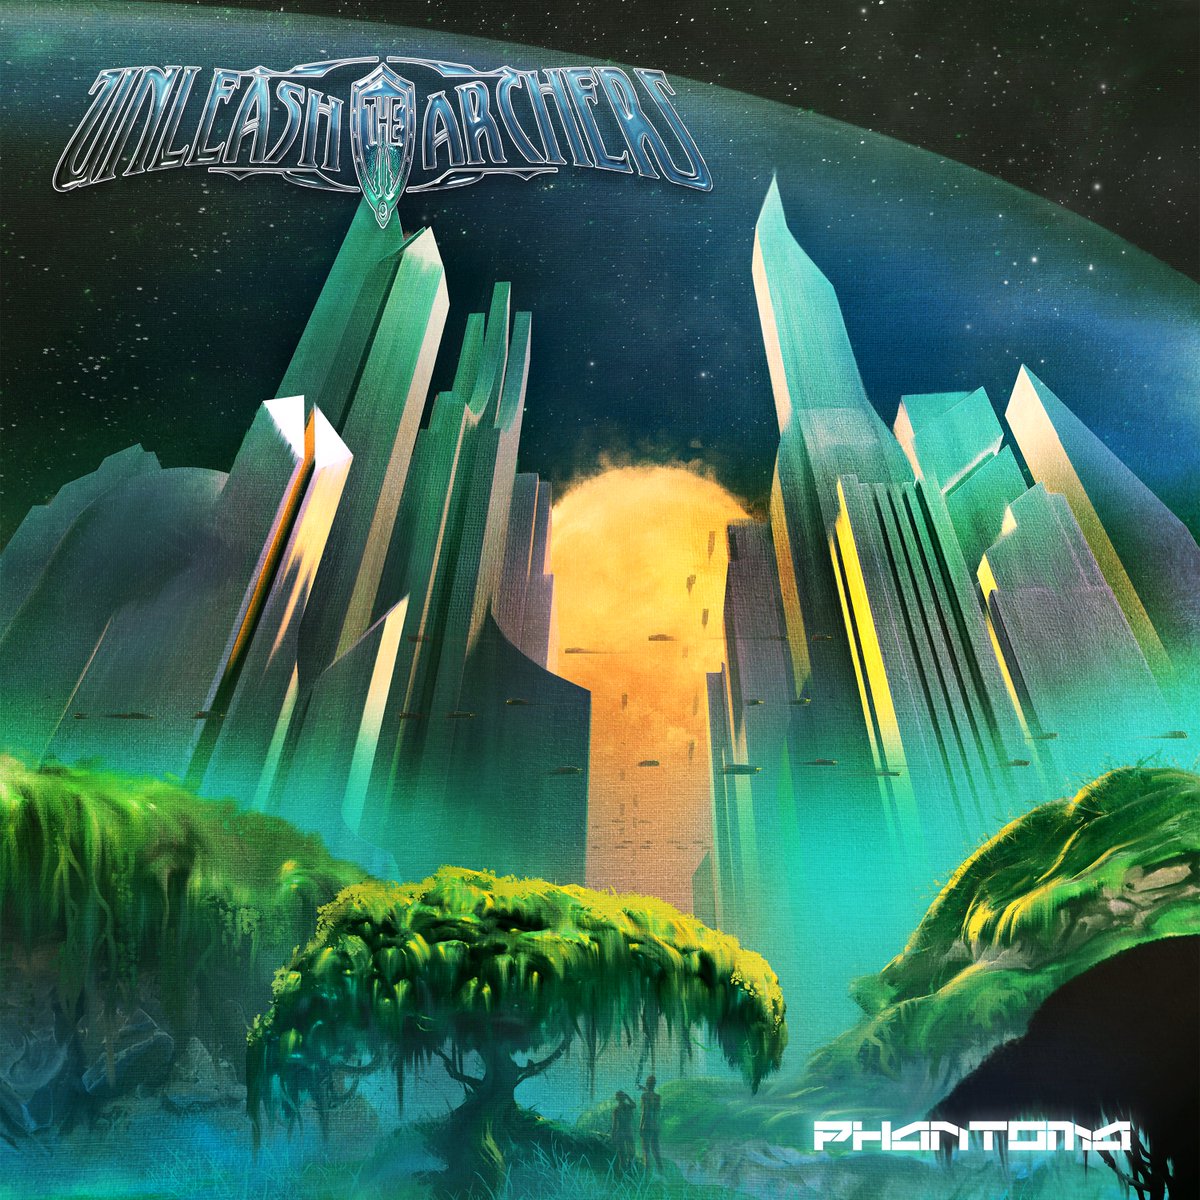 Happy Release Day, @UnleashArchers ! 🥳🤘 Phantoma is out today! Have you picked your favorite song yet? ⚫ Listen and order here: lnk.to/UTA-Phantoma ⚫ Listening party today via @Bandcamp ! See the band’s social media accounts for additional information.